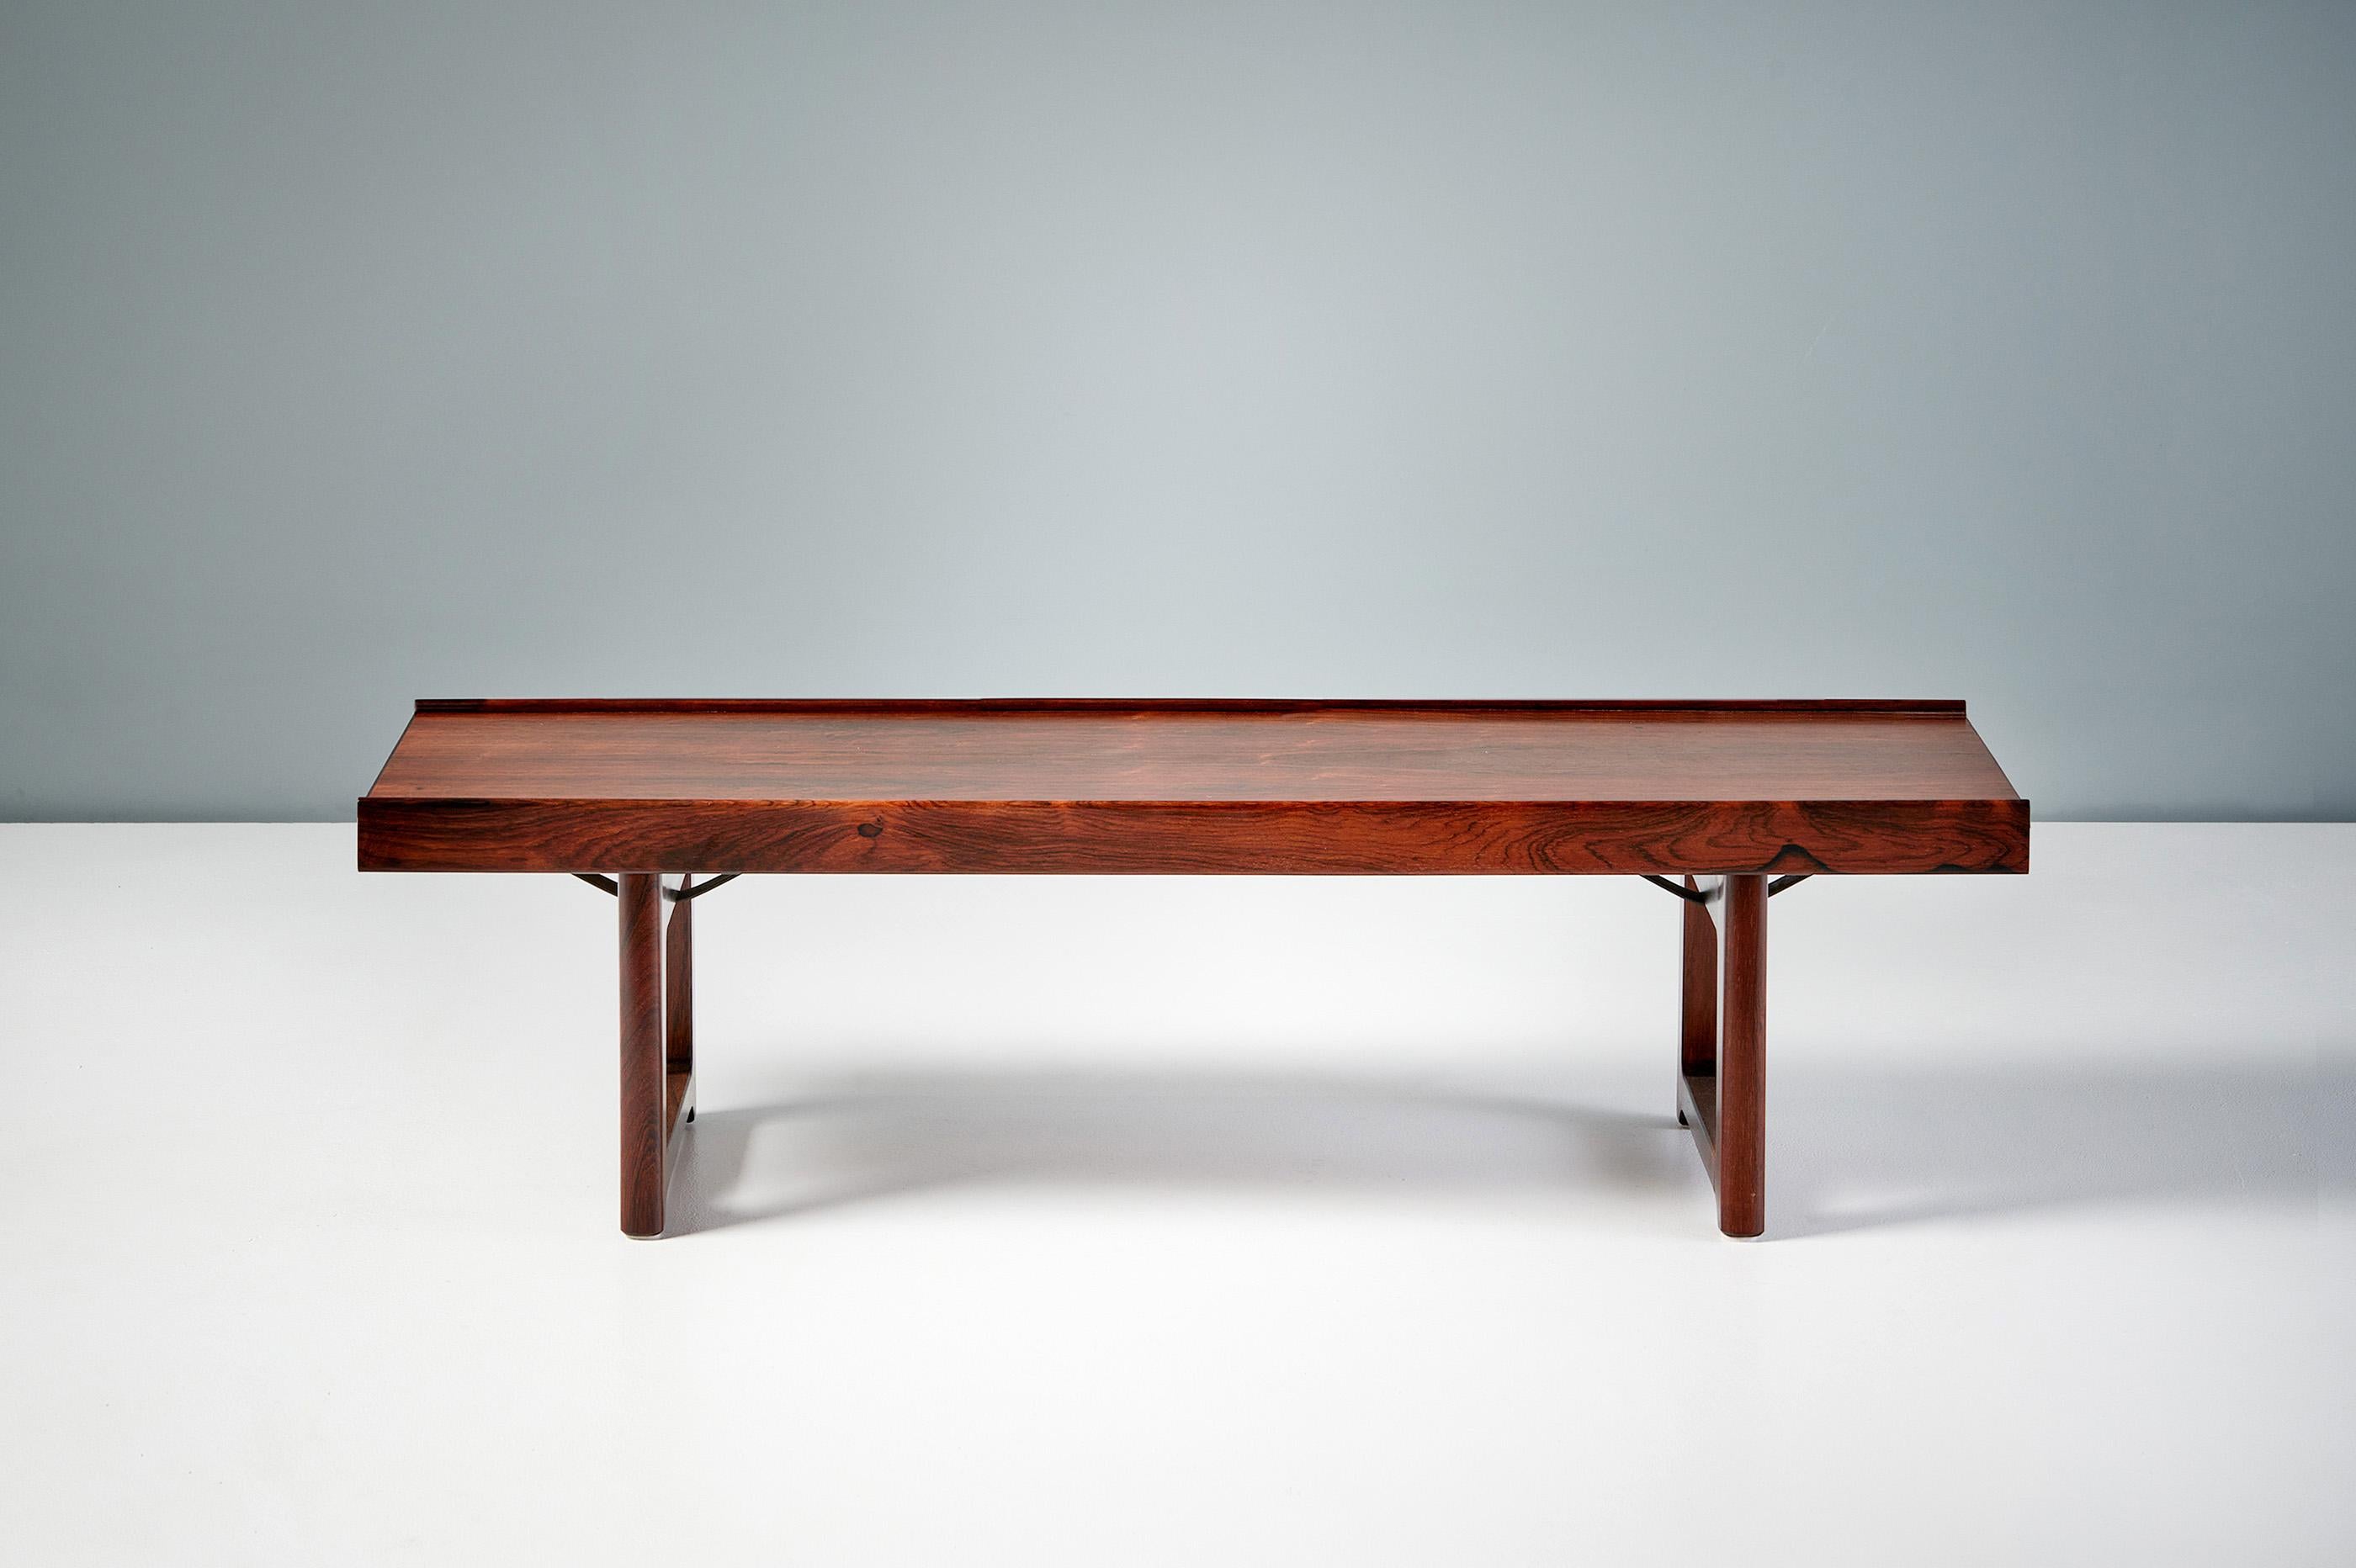 Torbjorn Afdal  - Krobo Bench, c1960

Highly figured rosewood bench or coffee table from Norwegian designer Torbjorn Afdal for Bruksbo. Produced c1960s with veneered top and solid legs.

H: 34cm  /  D: 37cm  /  W: 120cm 
 